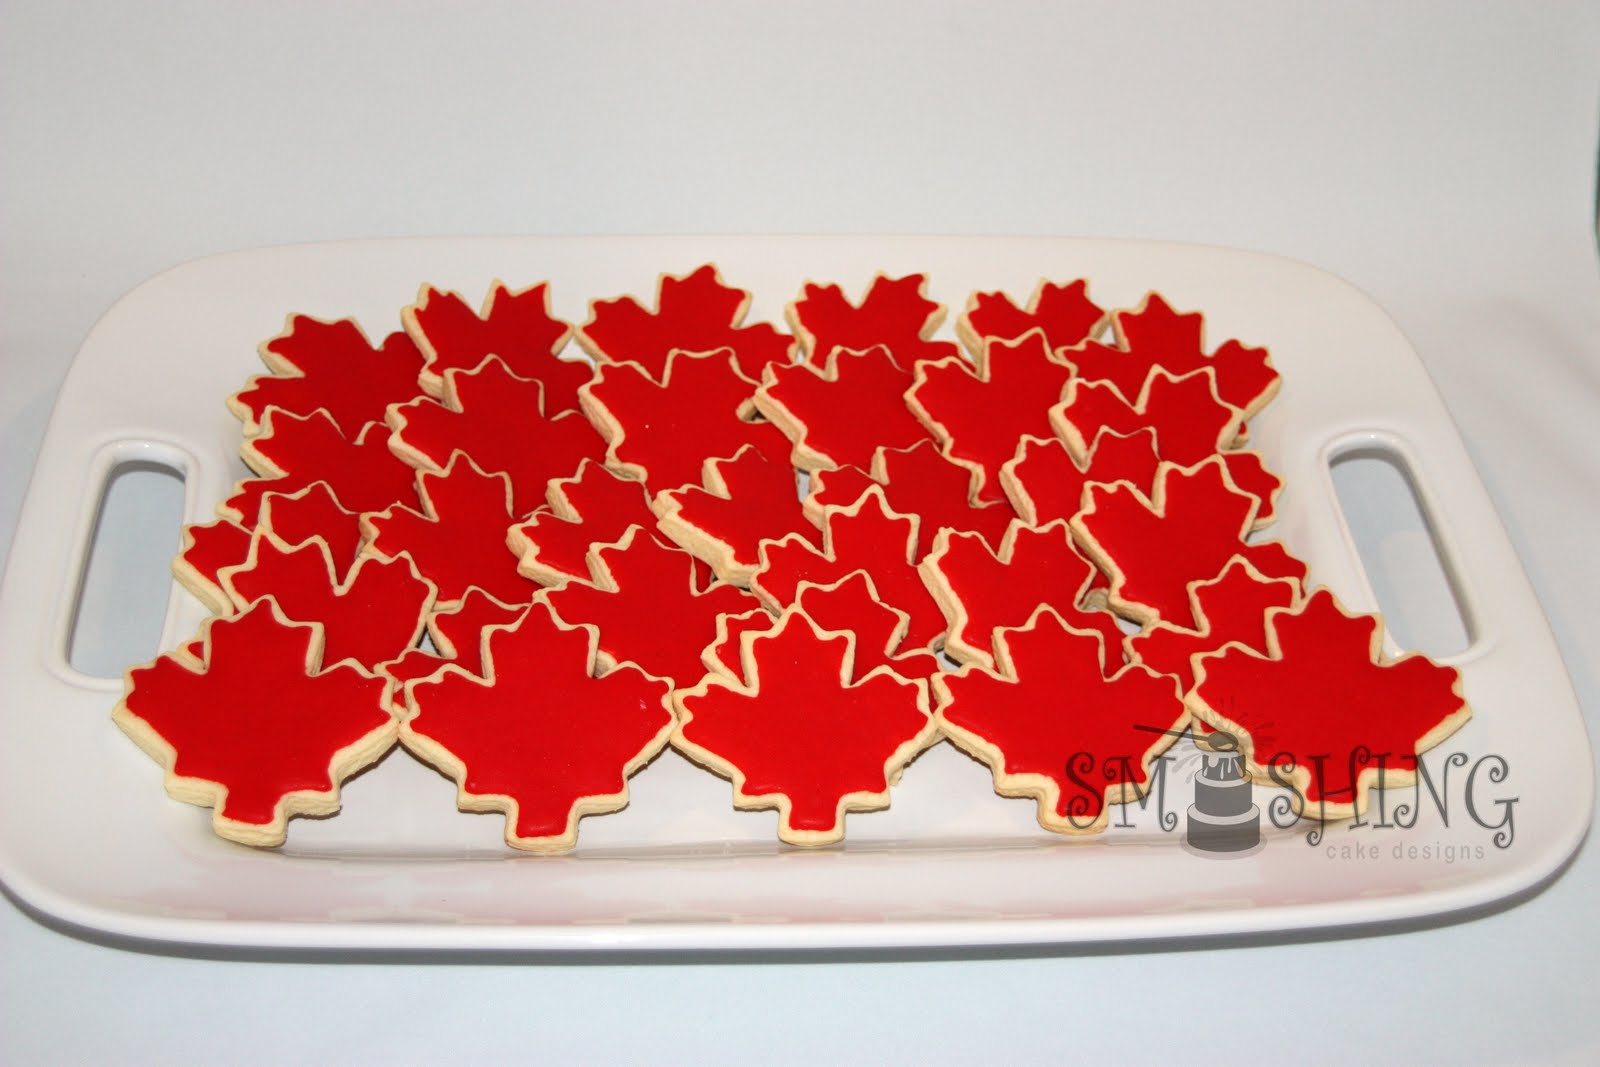 Canada+day+cake+decorations